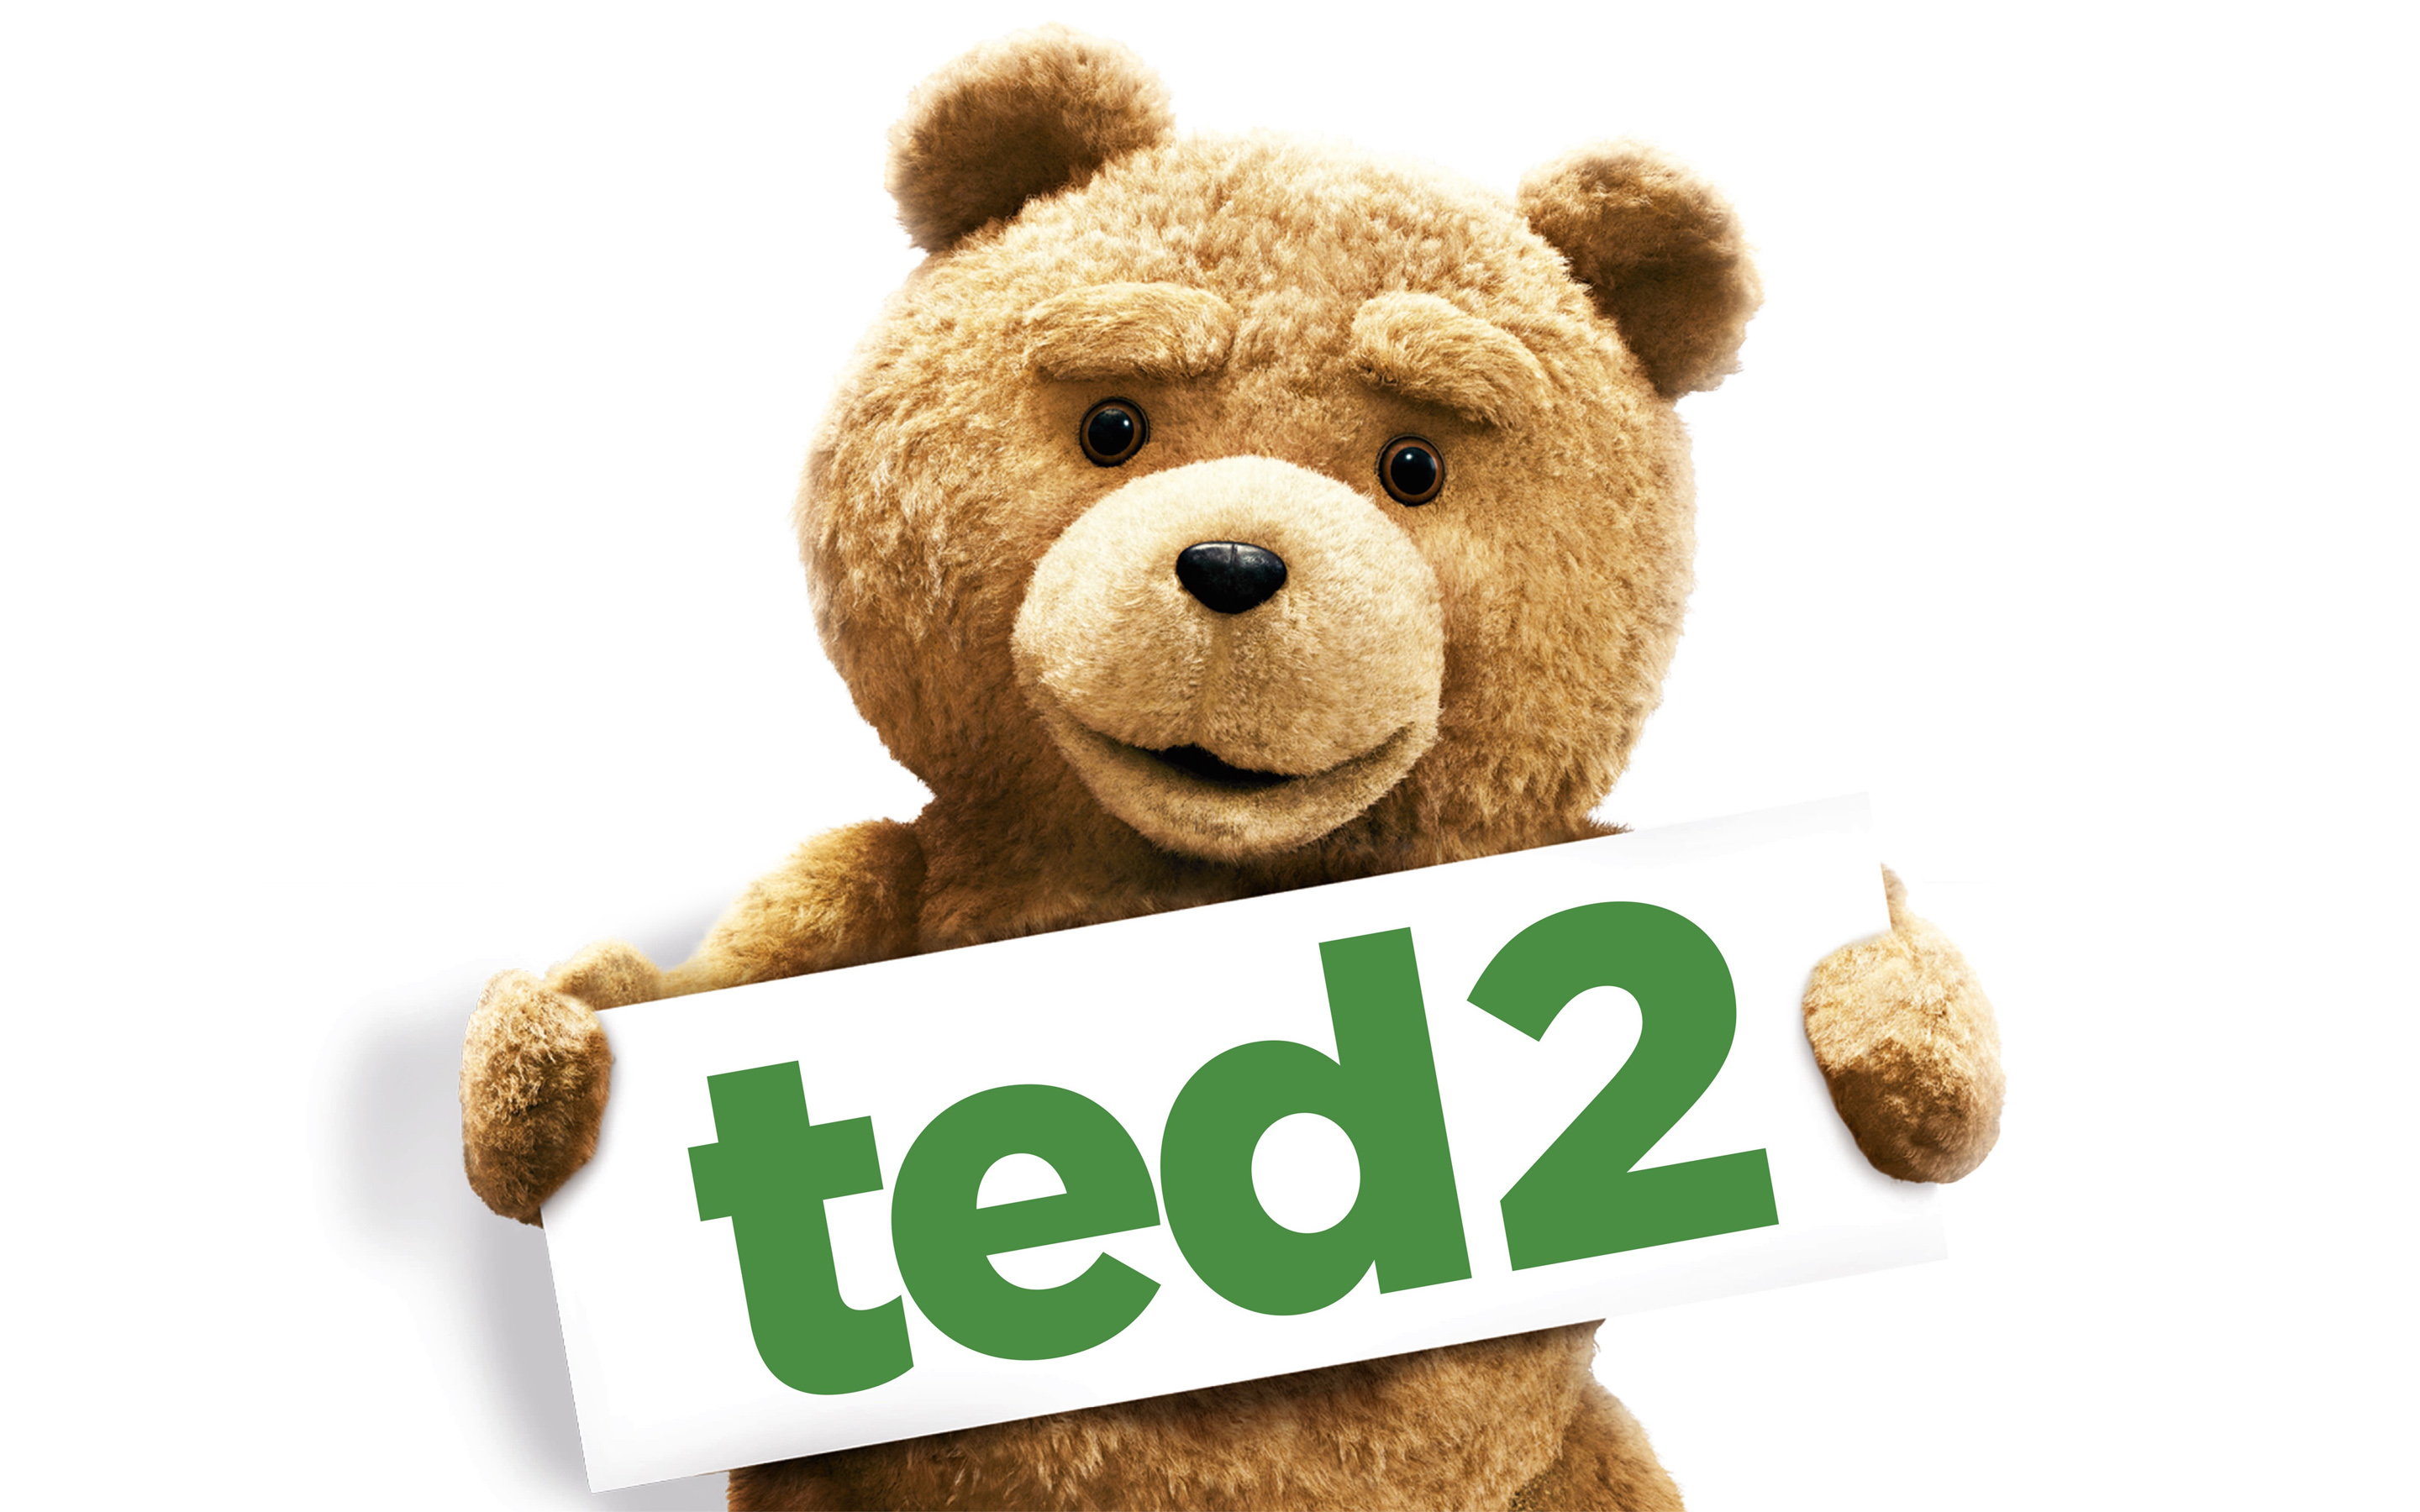 Movies Ted Movie wallpapers (Desktop, Phone, Tablet) - Awesome ...